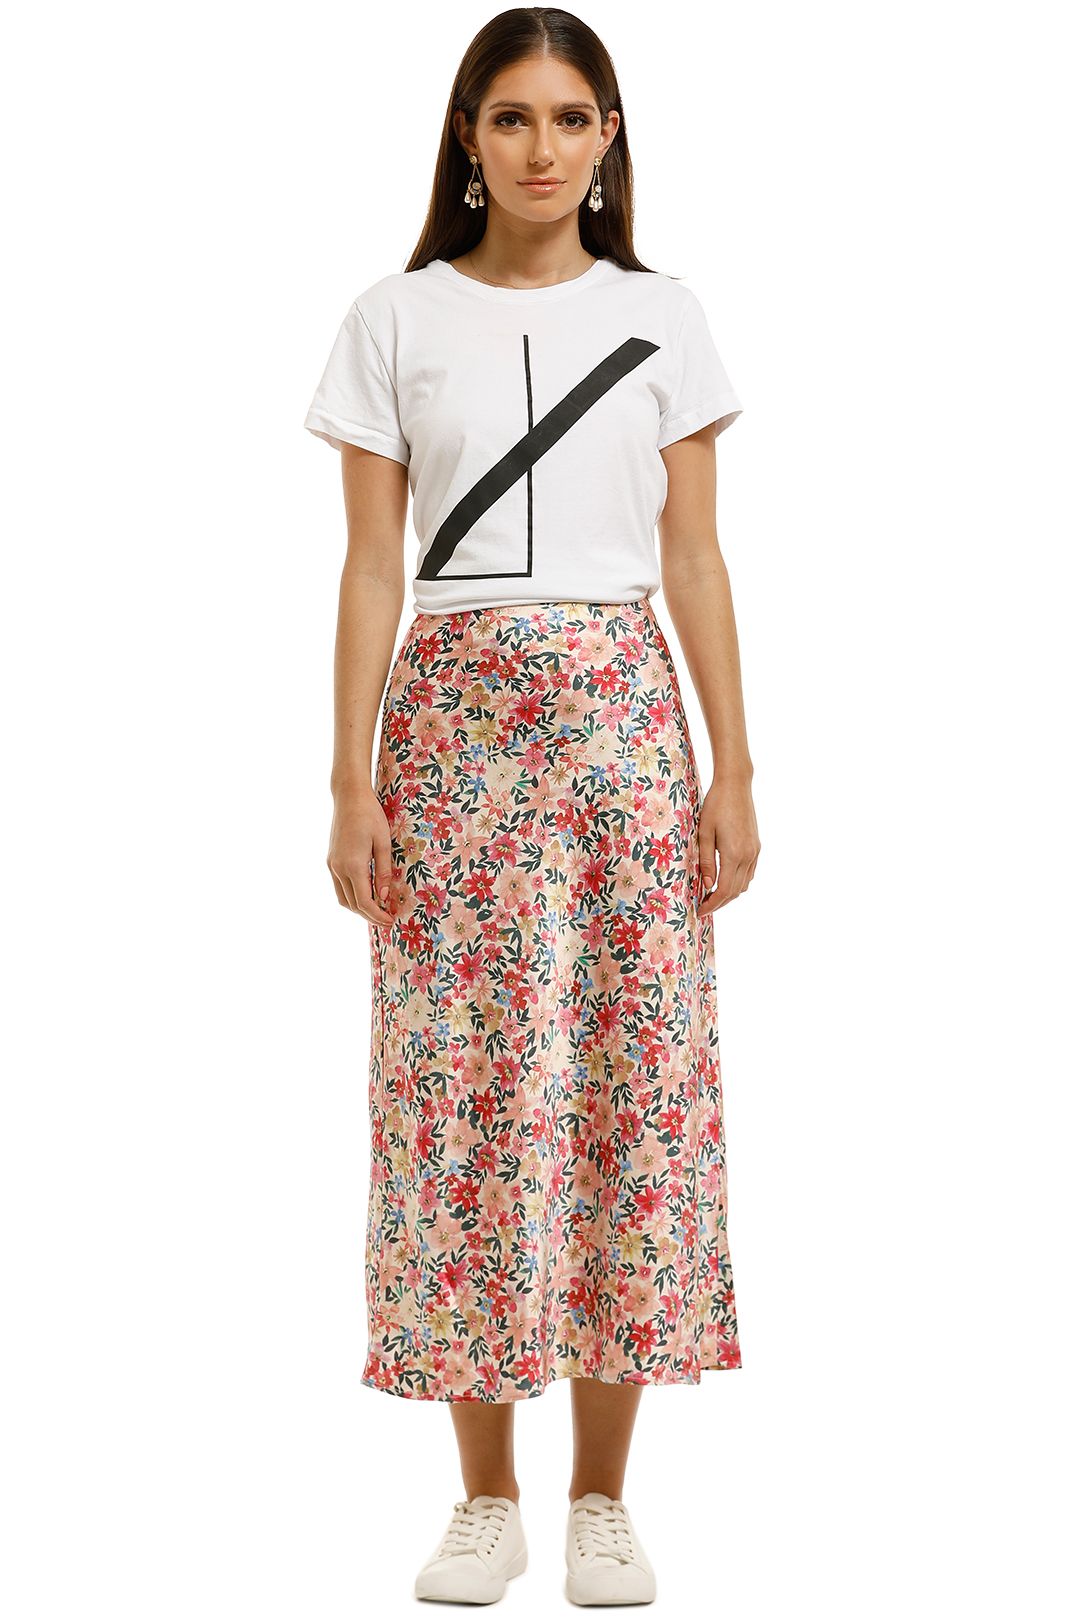 CMEO-Collective-Time-Flew-Skirt-Cream-Garden-Floral-Front